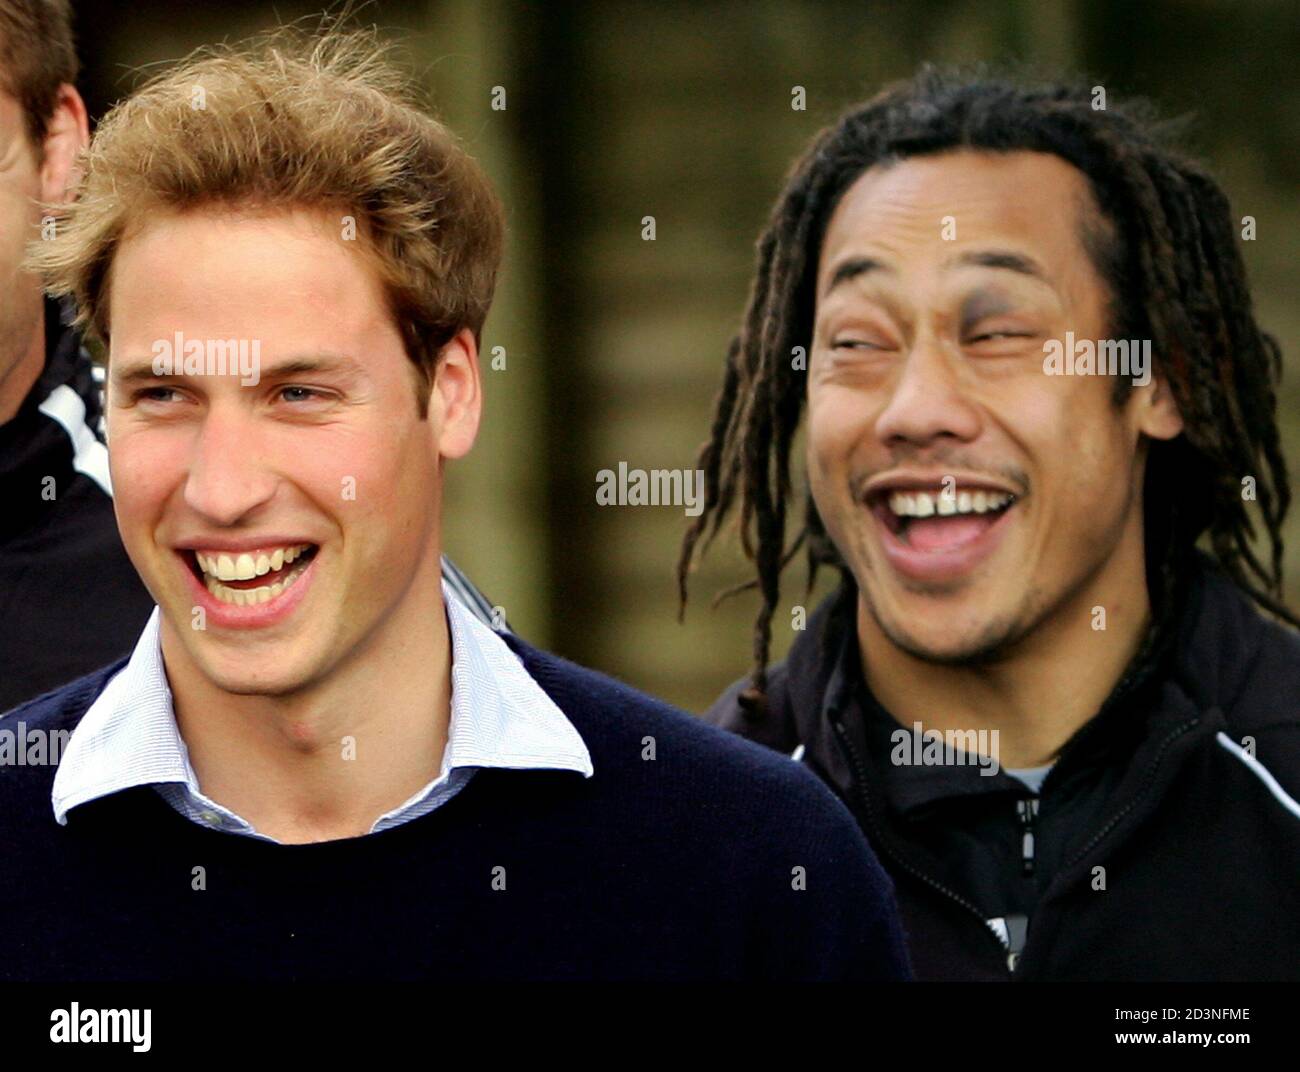 Britain's Prince William (L) laughs with captain of the All Blacks Tana Umaga at a public training session in Auckland July 4, 2005. [Prince William, who graduated recently from Scotland's St Andrews University, met the All Black team two days after they defeated the British and Irish Lions in Wellington and took an unbeatable 2-0 lead in the best-of-three test series.] Prince William is also performing official duties during his ten-day tour of New Zealand, his first official tour of a foreign country by himself. Banque D'Images